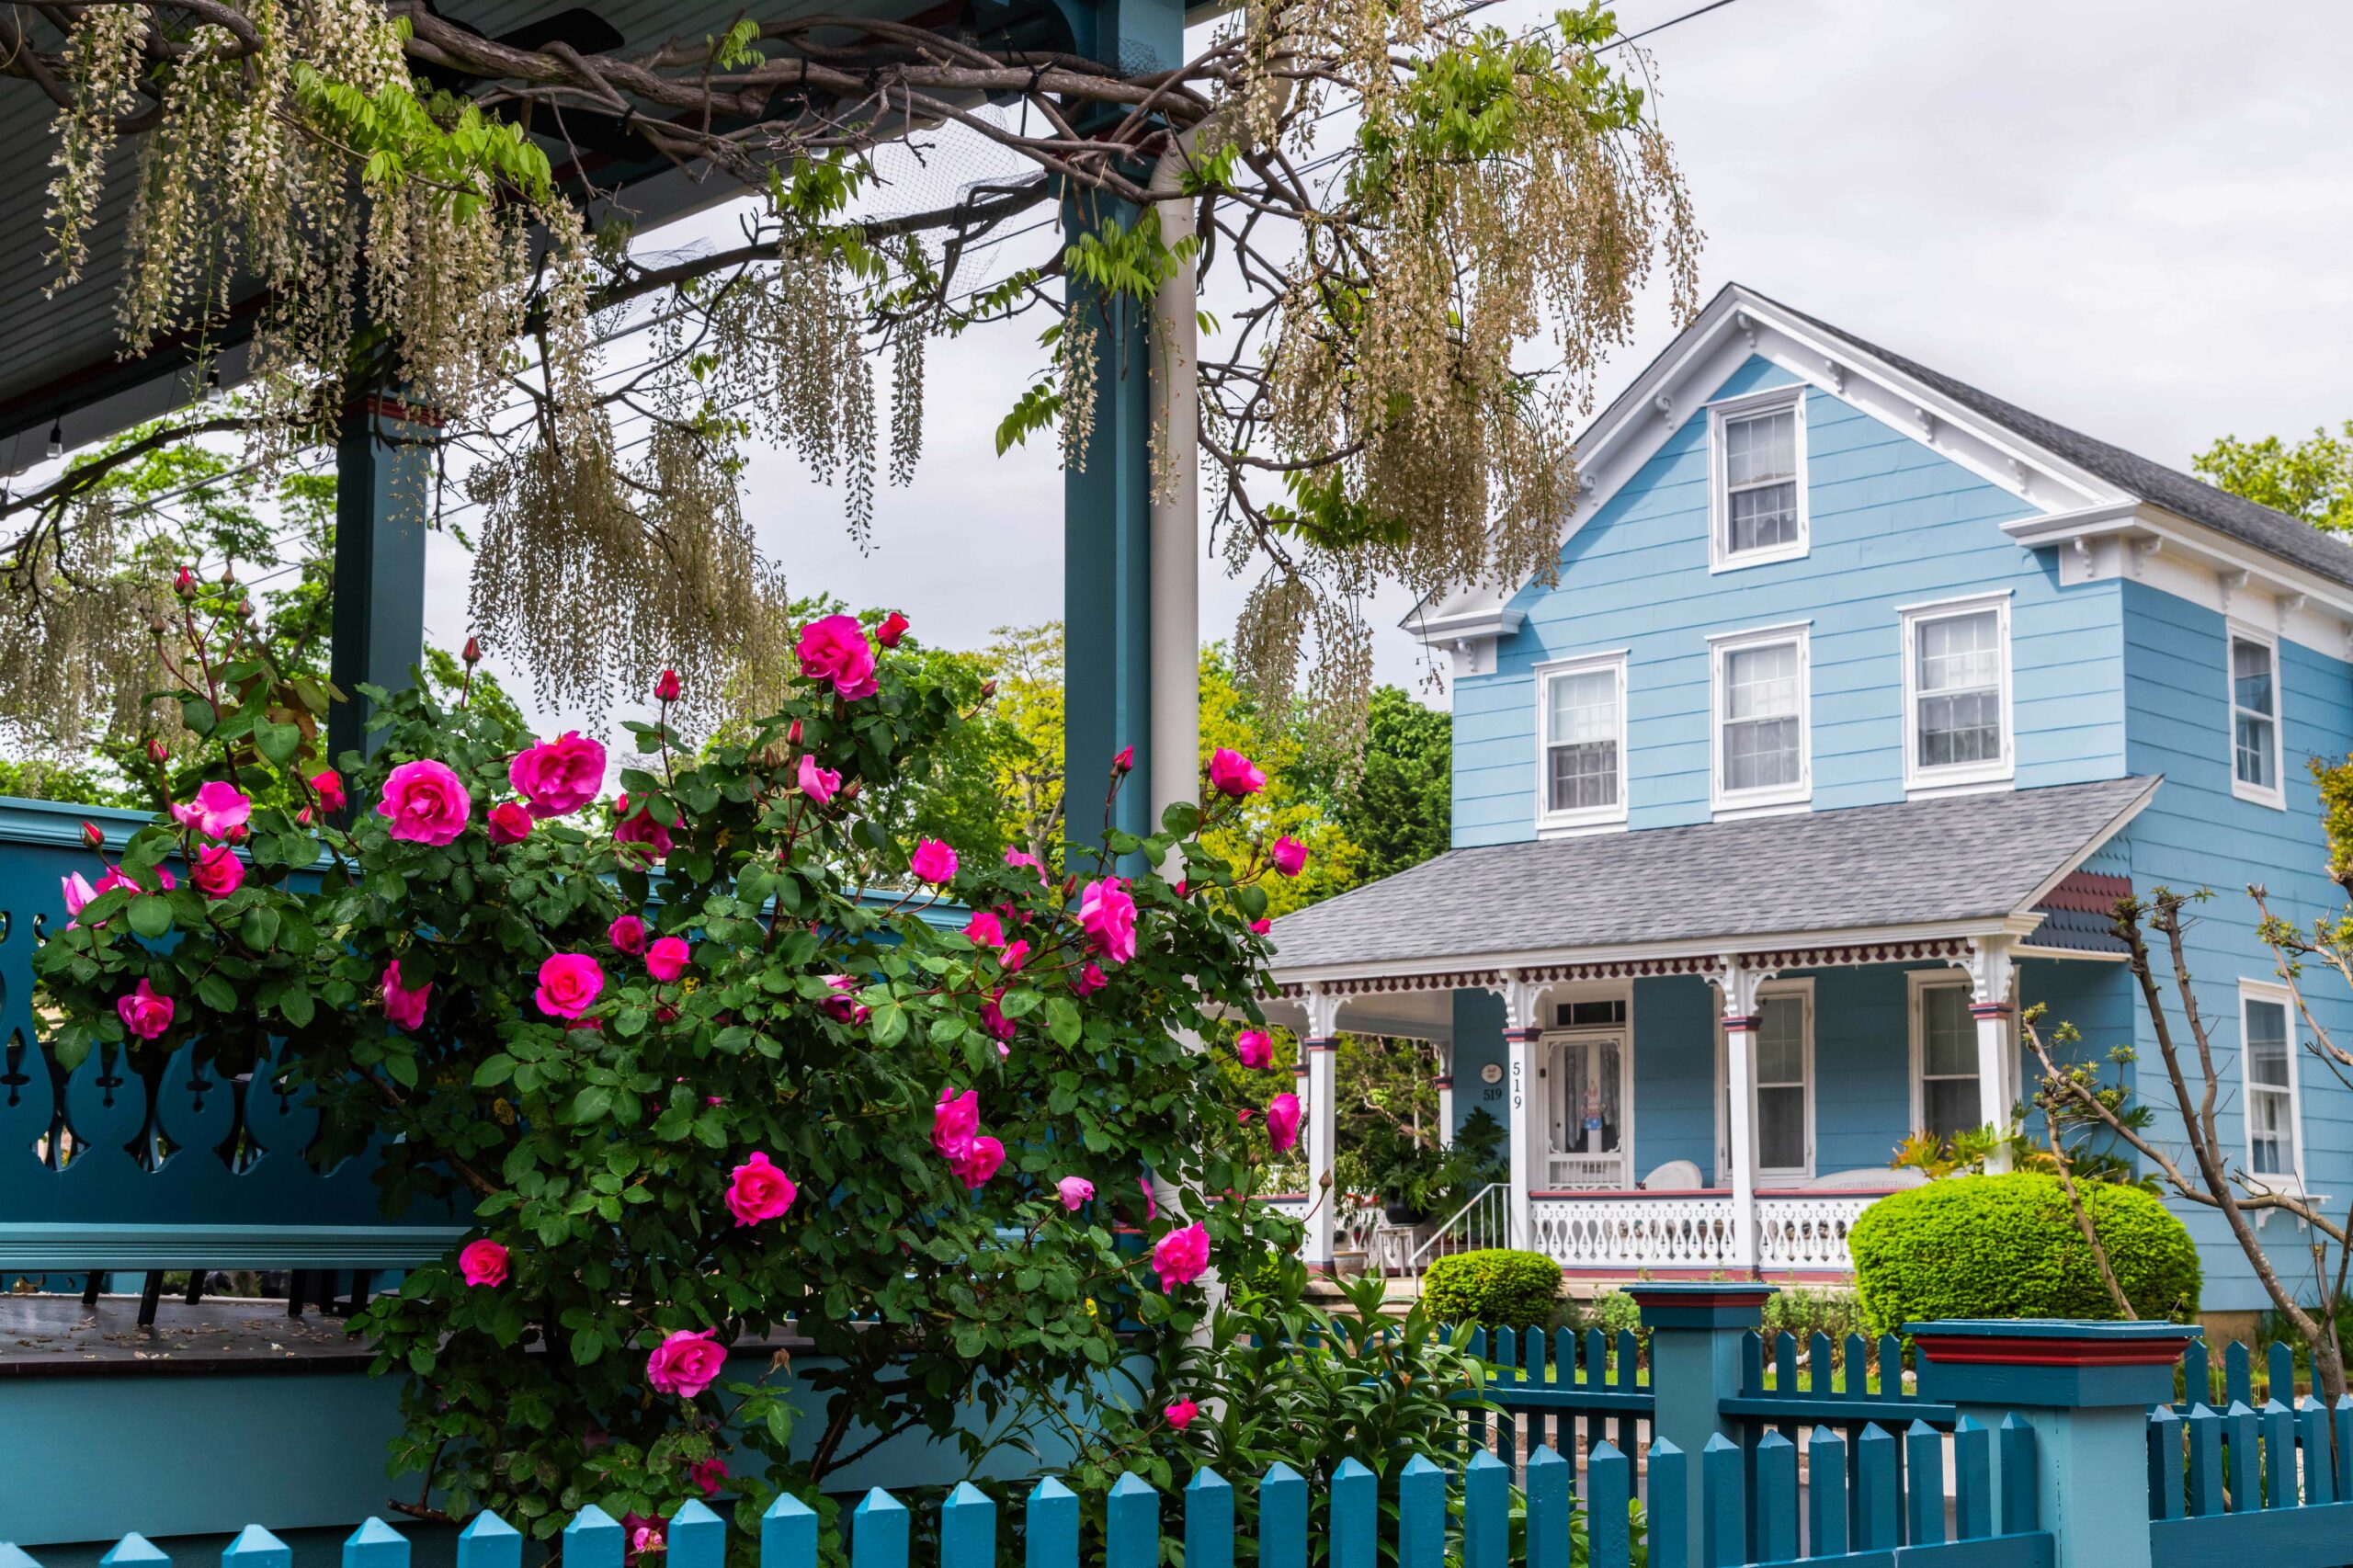 A bush of pink roses growing on a porch with a light blue Victorian house in the background